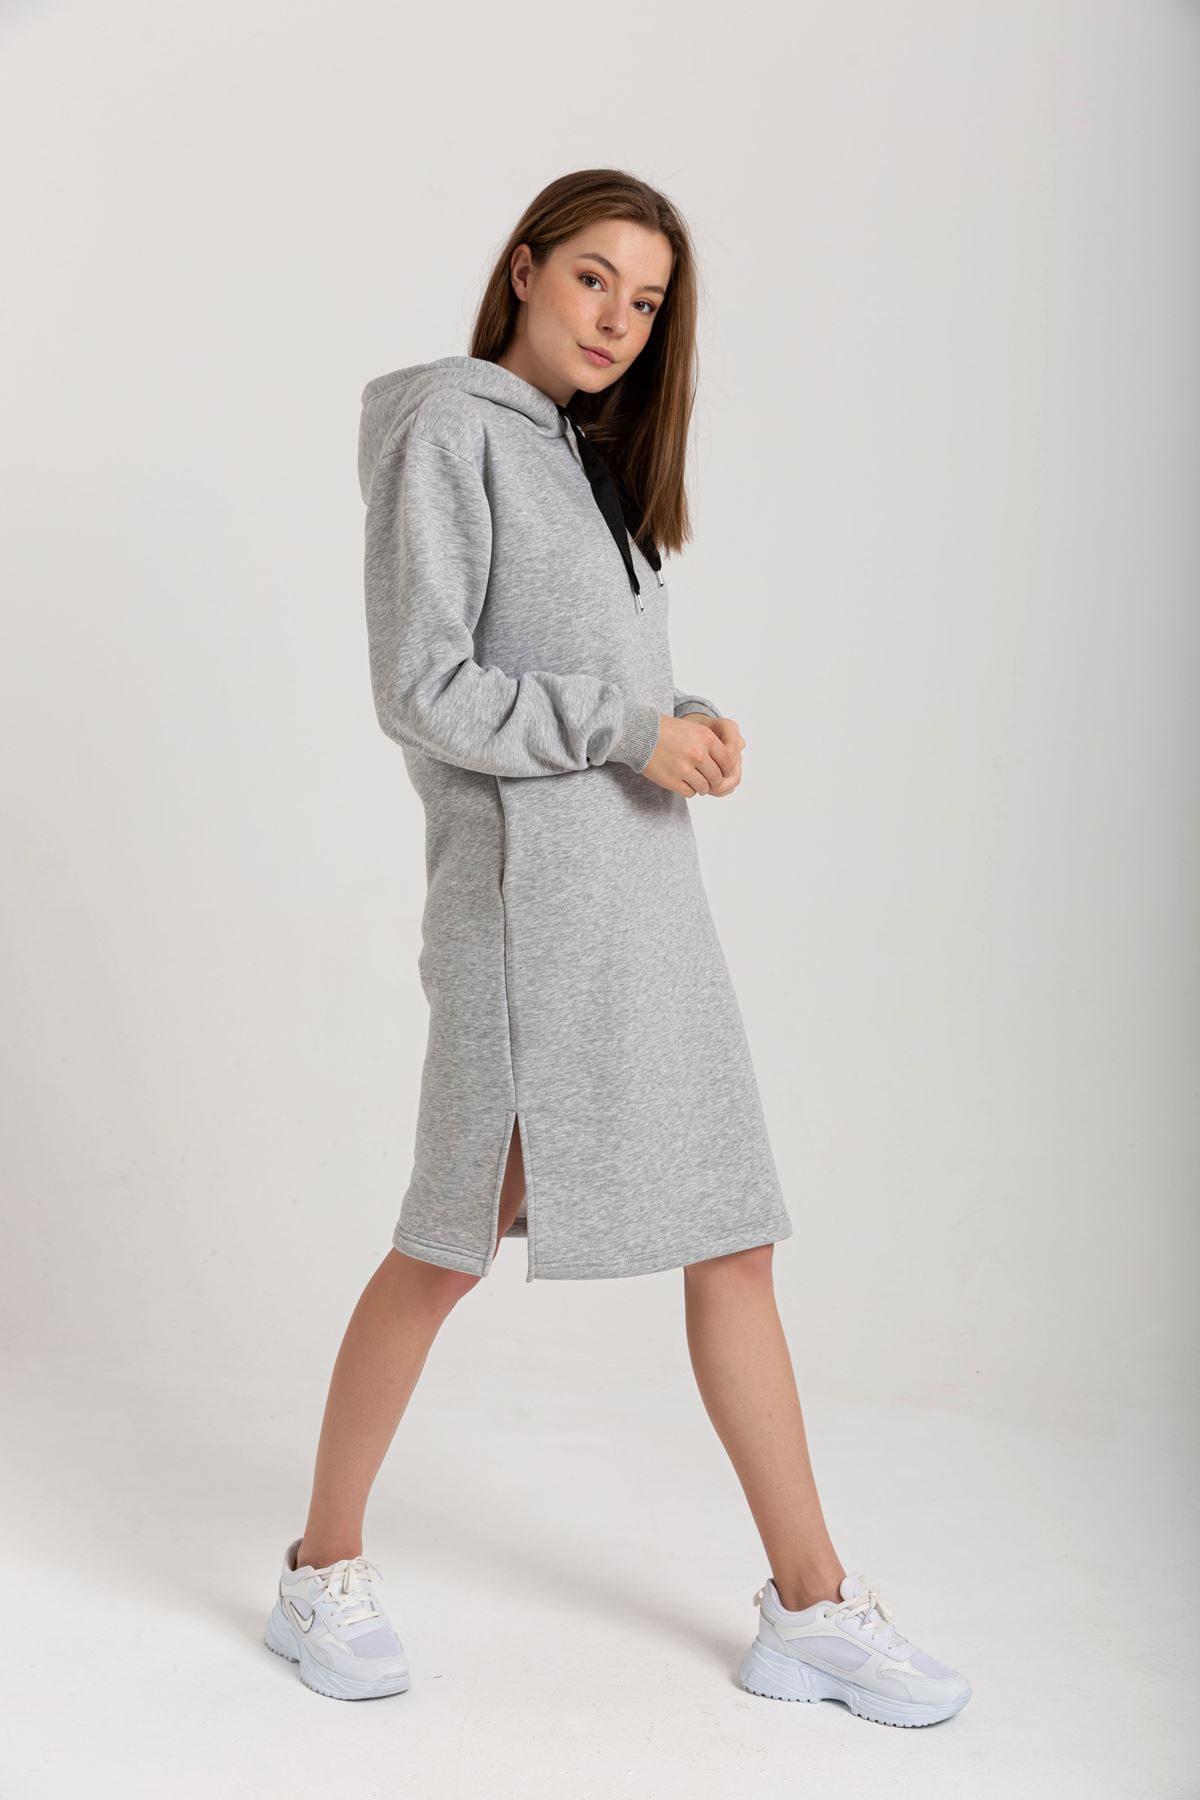 Third Knit With Wool İnside Fabric Long Sleeve Hooded Oversize Women Dress